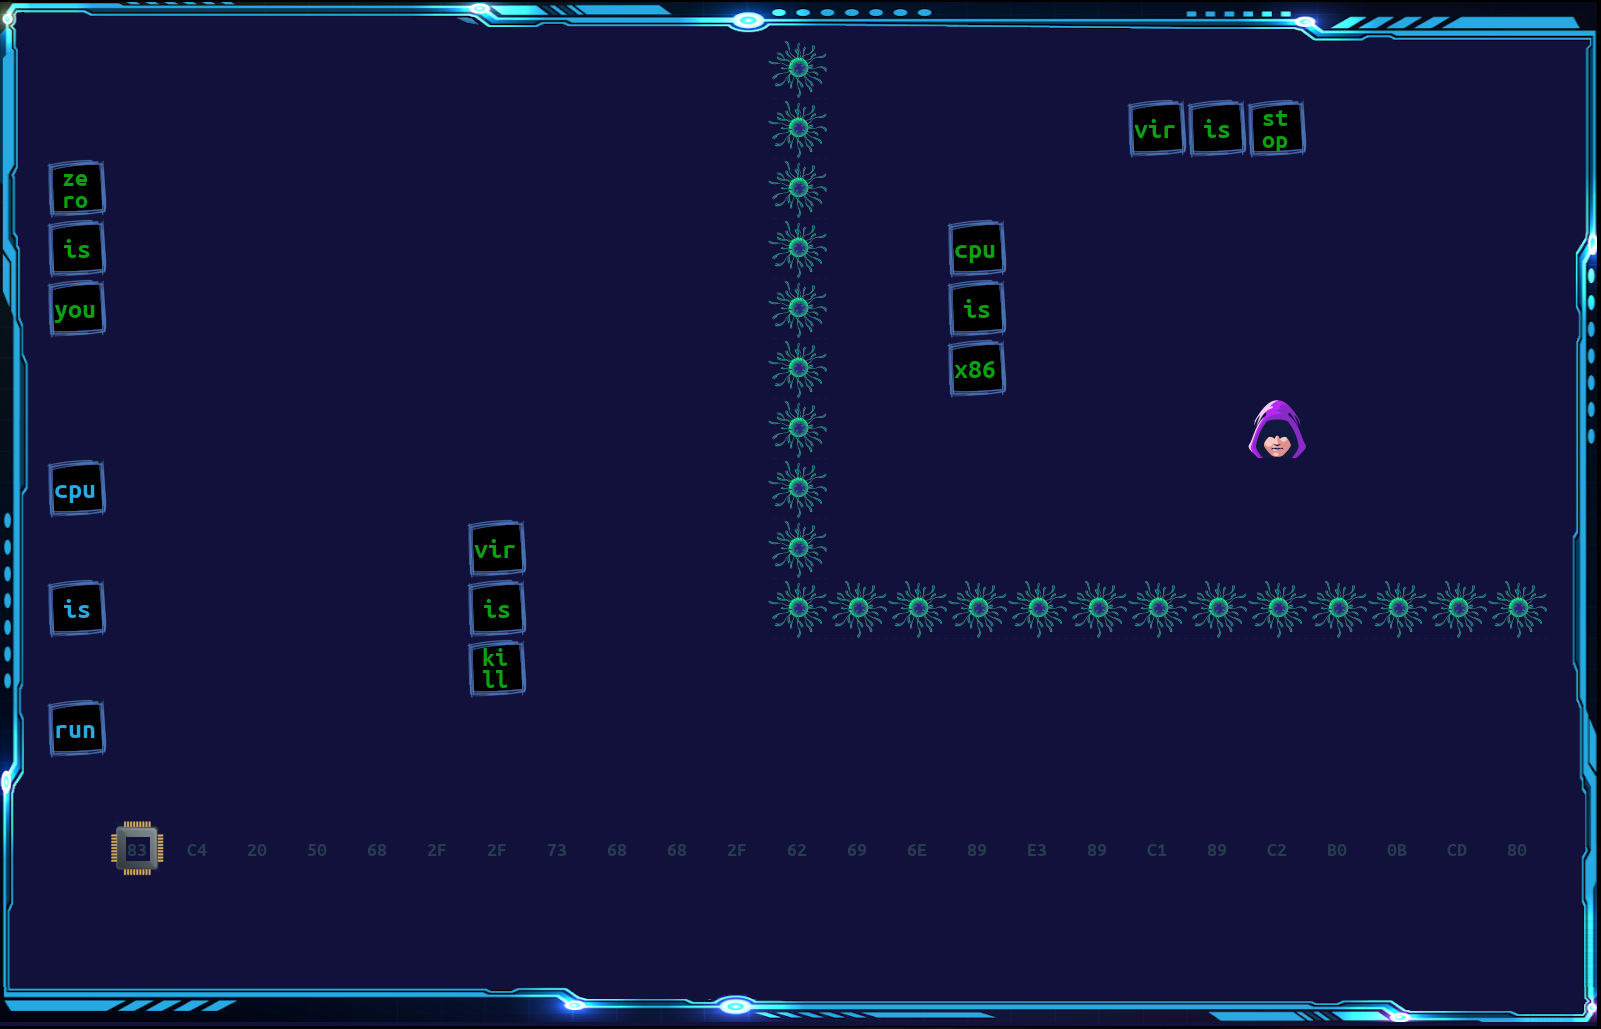 One of the first levels of the game